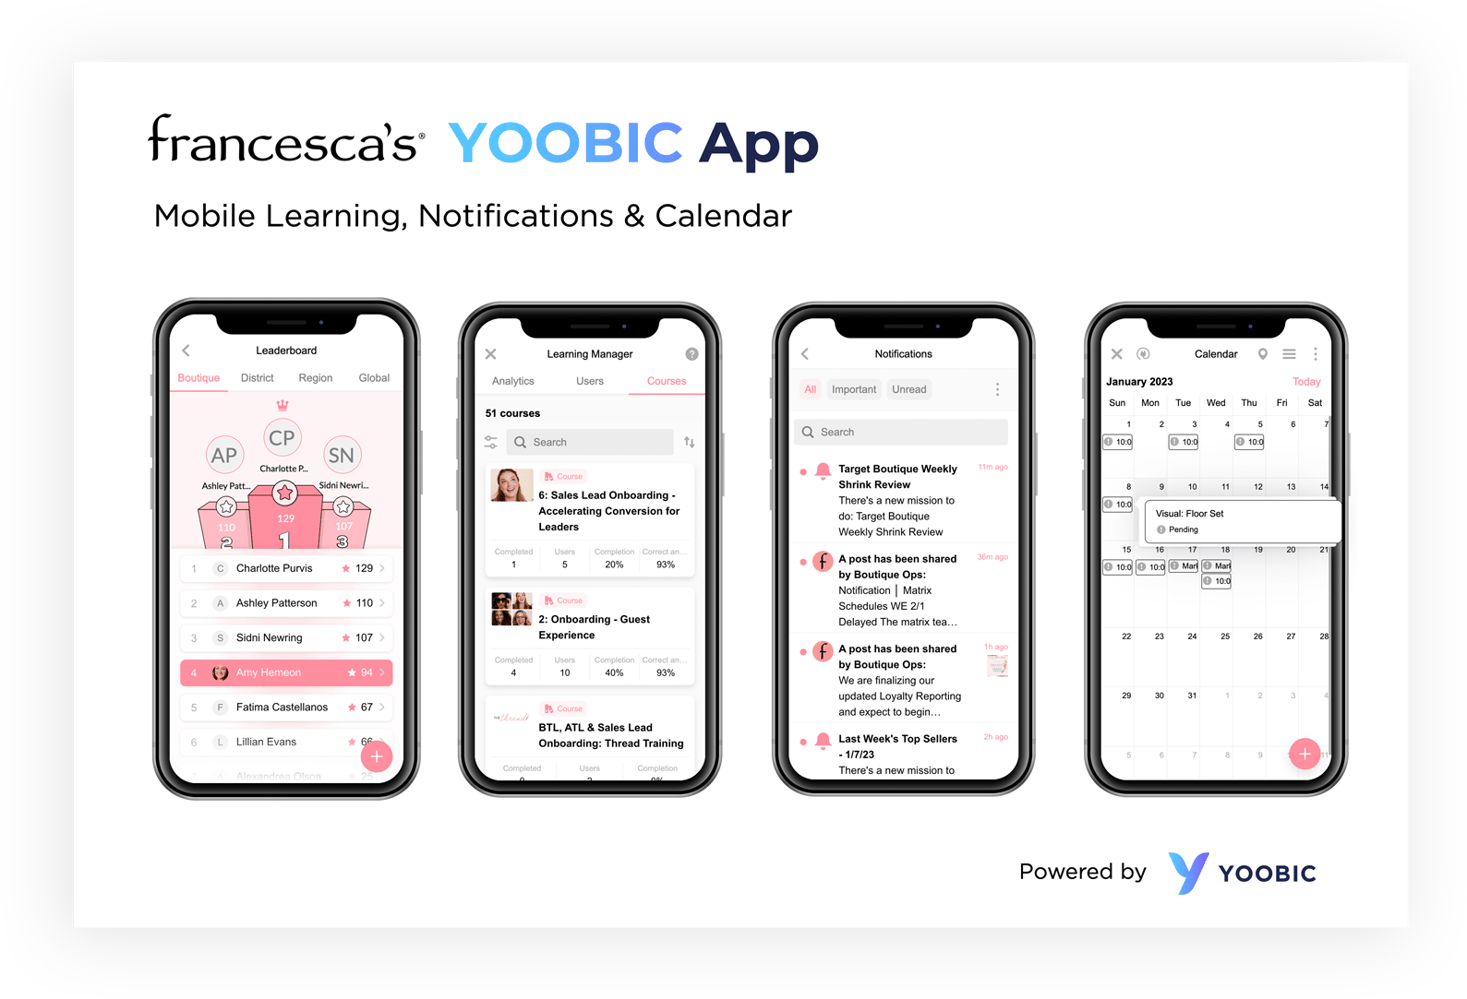 YOOBIC App for francesca's : Learning, notifications and calendar